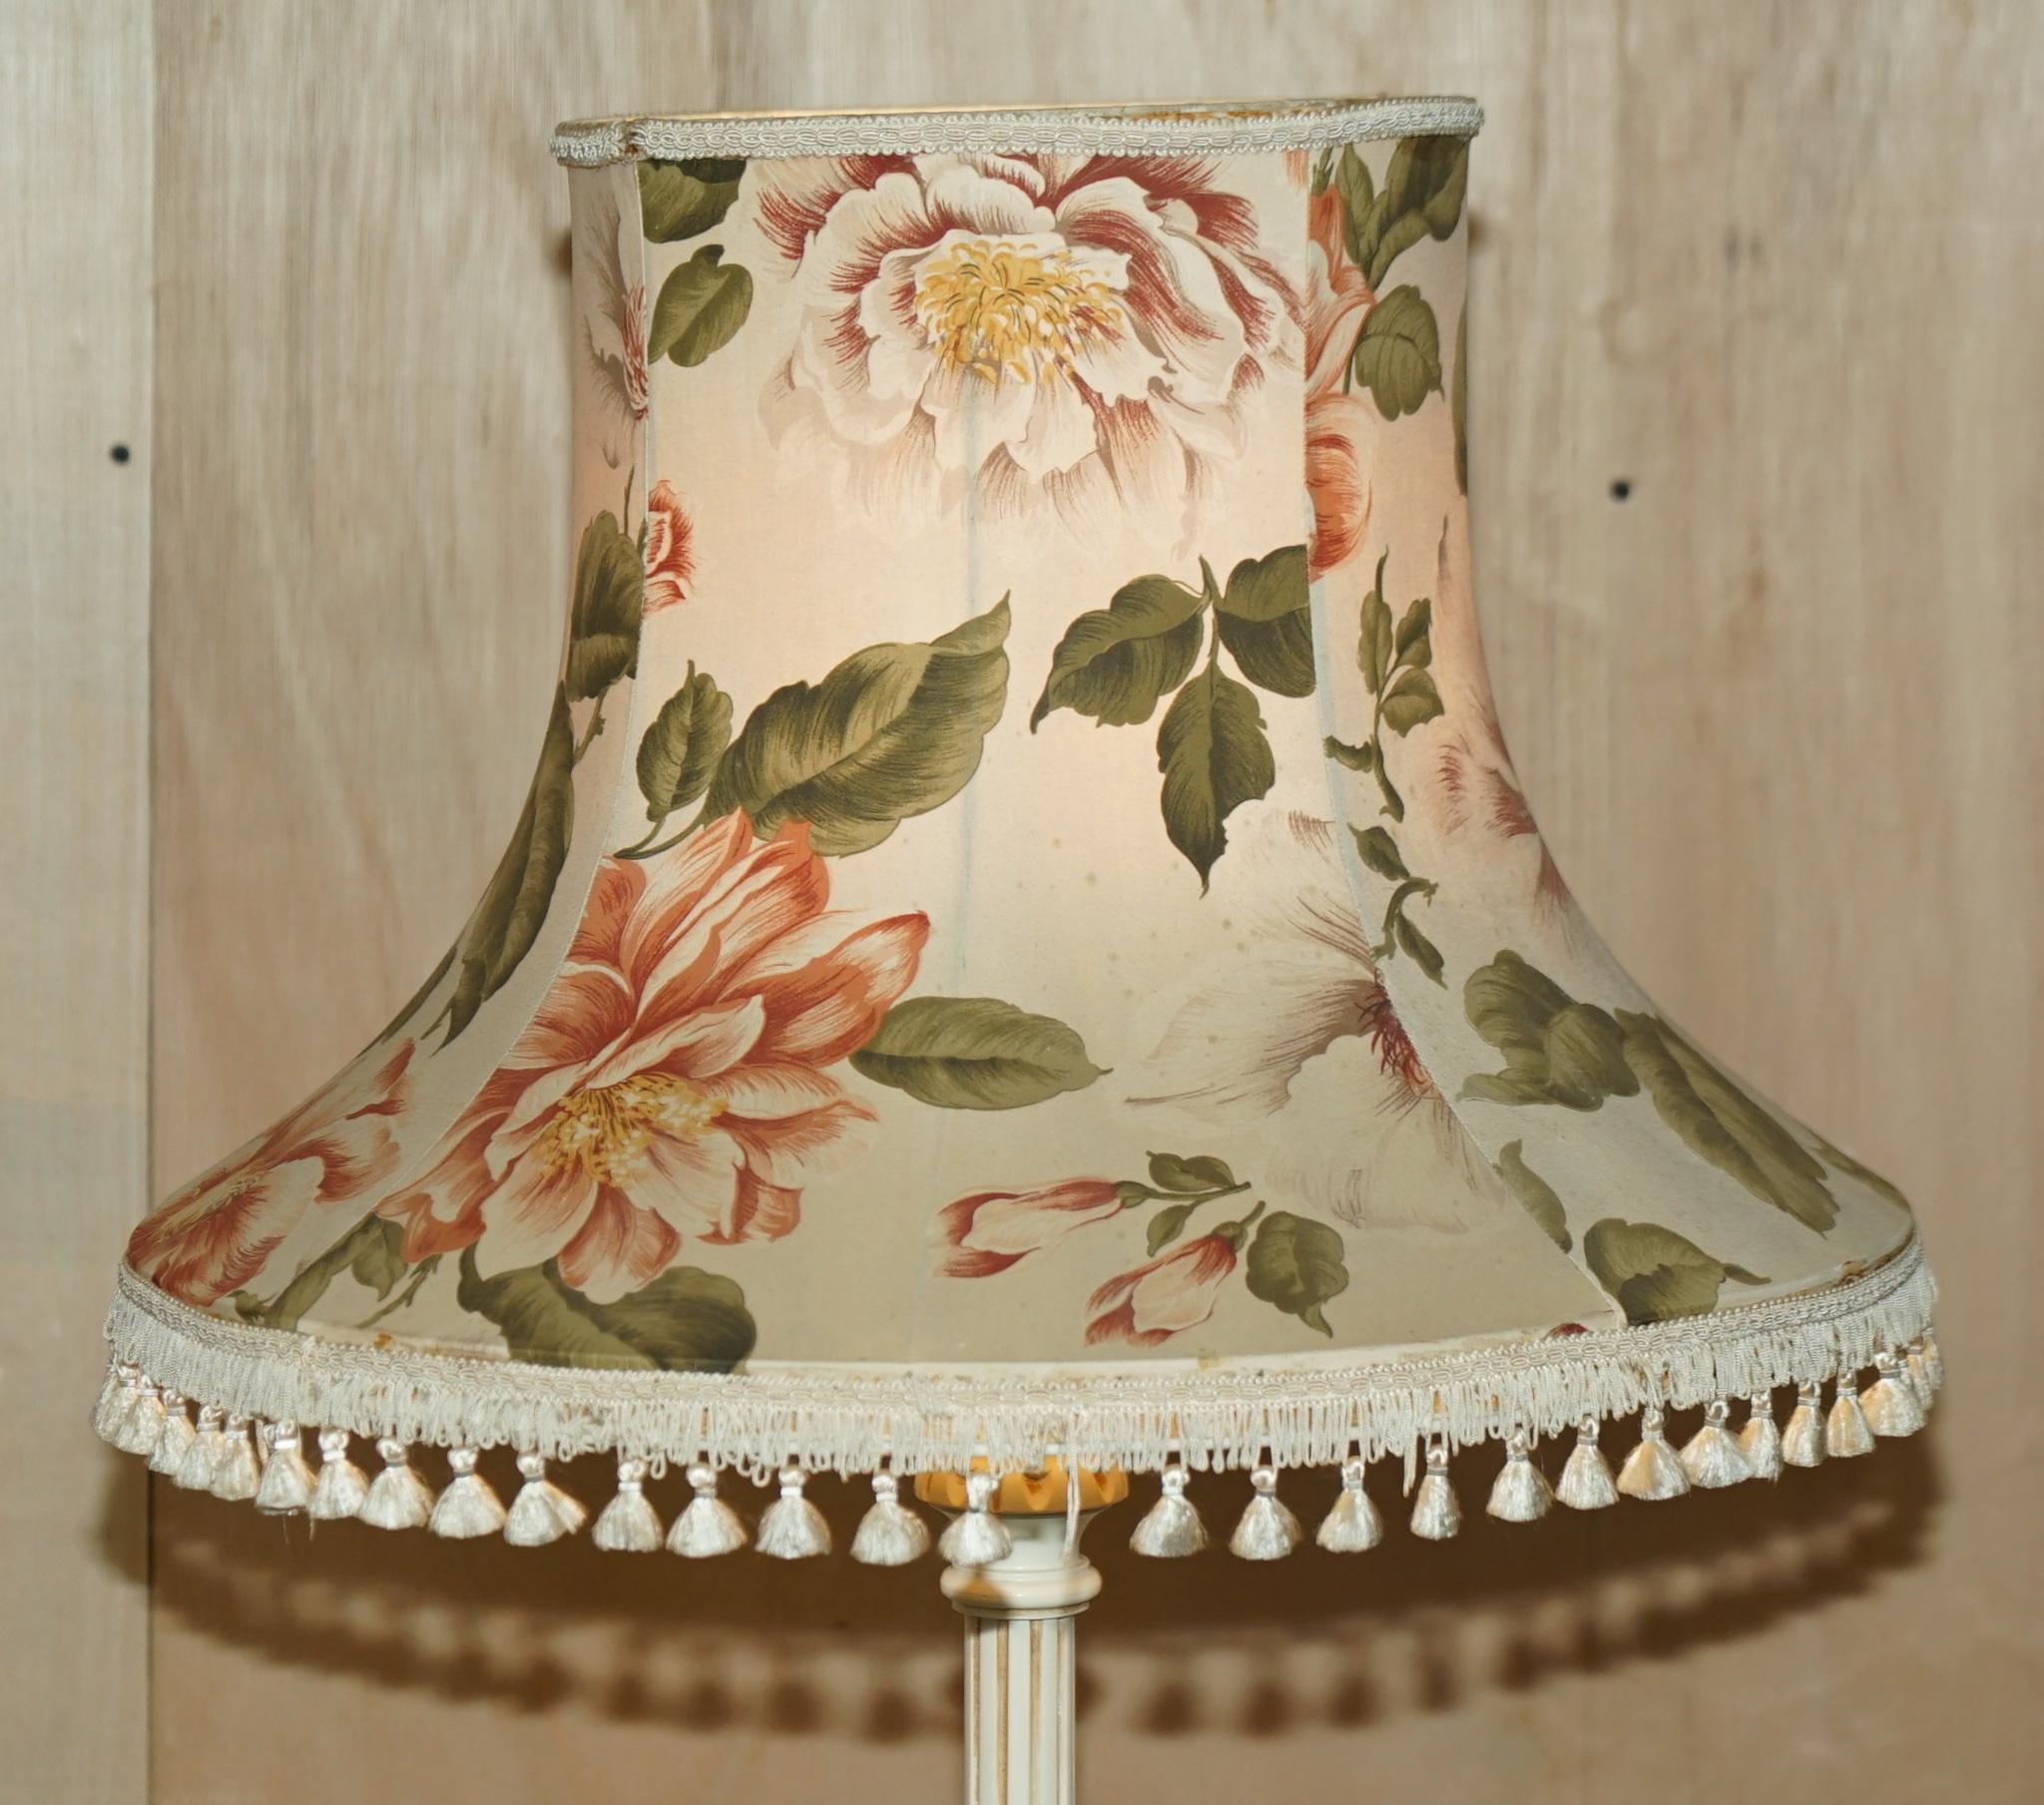 Royal House Antiques

Royal House Antiques is delighted to offer for sale this nice vintage French floor standing lamp painted in the shabby chic style with the original shade  

Please note the delivery fee listed is just a guide, it covers within